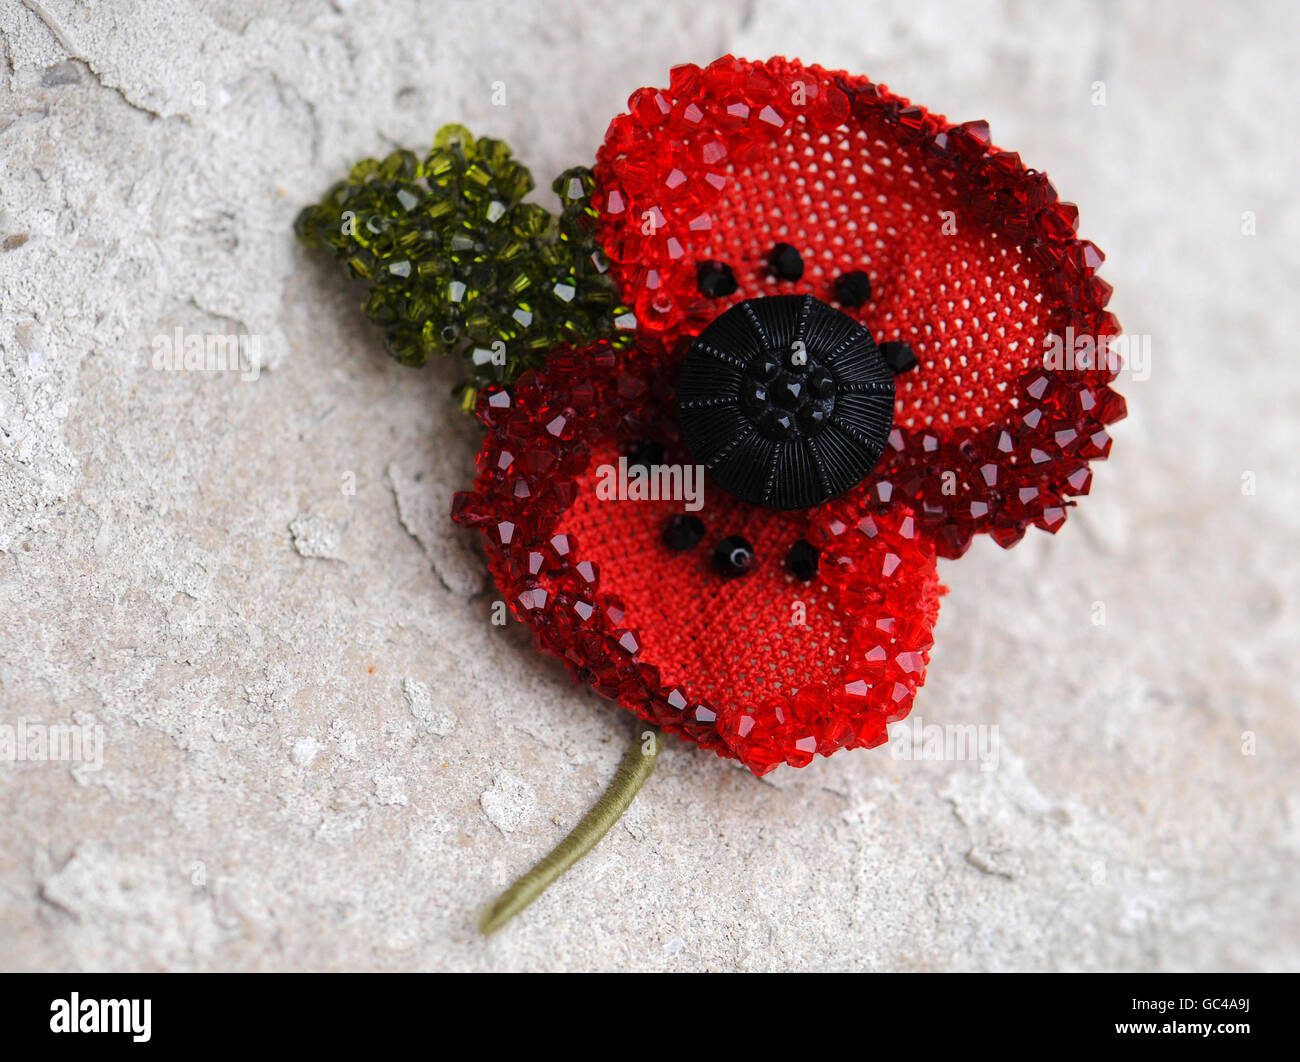 A new limited edition Remembrance Day poppy designed by Kleshna, exclusively to support British troops. Stock Photo